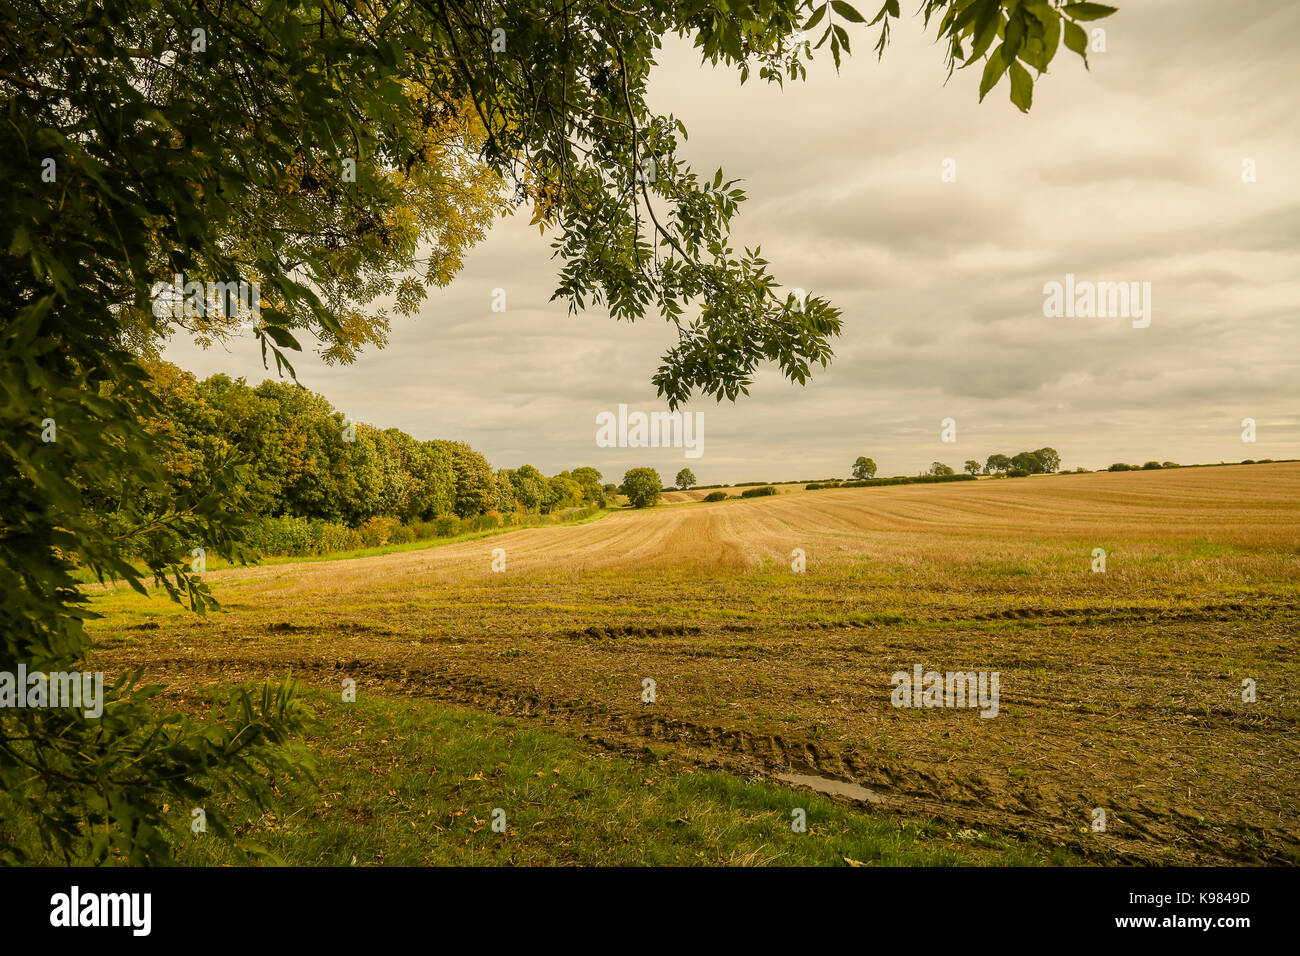 A stubble field with a stack of hay being protected from bad weather by sheltering trees Stock Photo